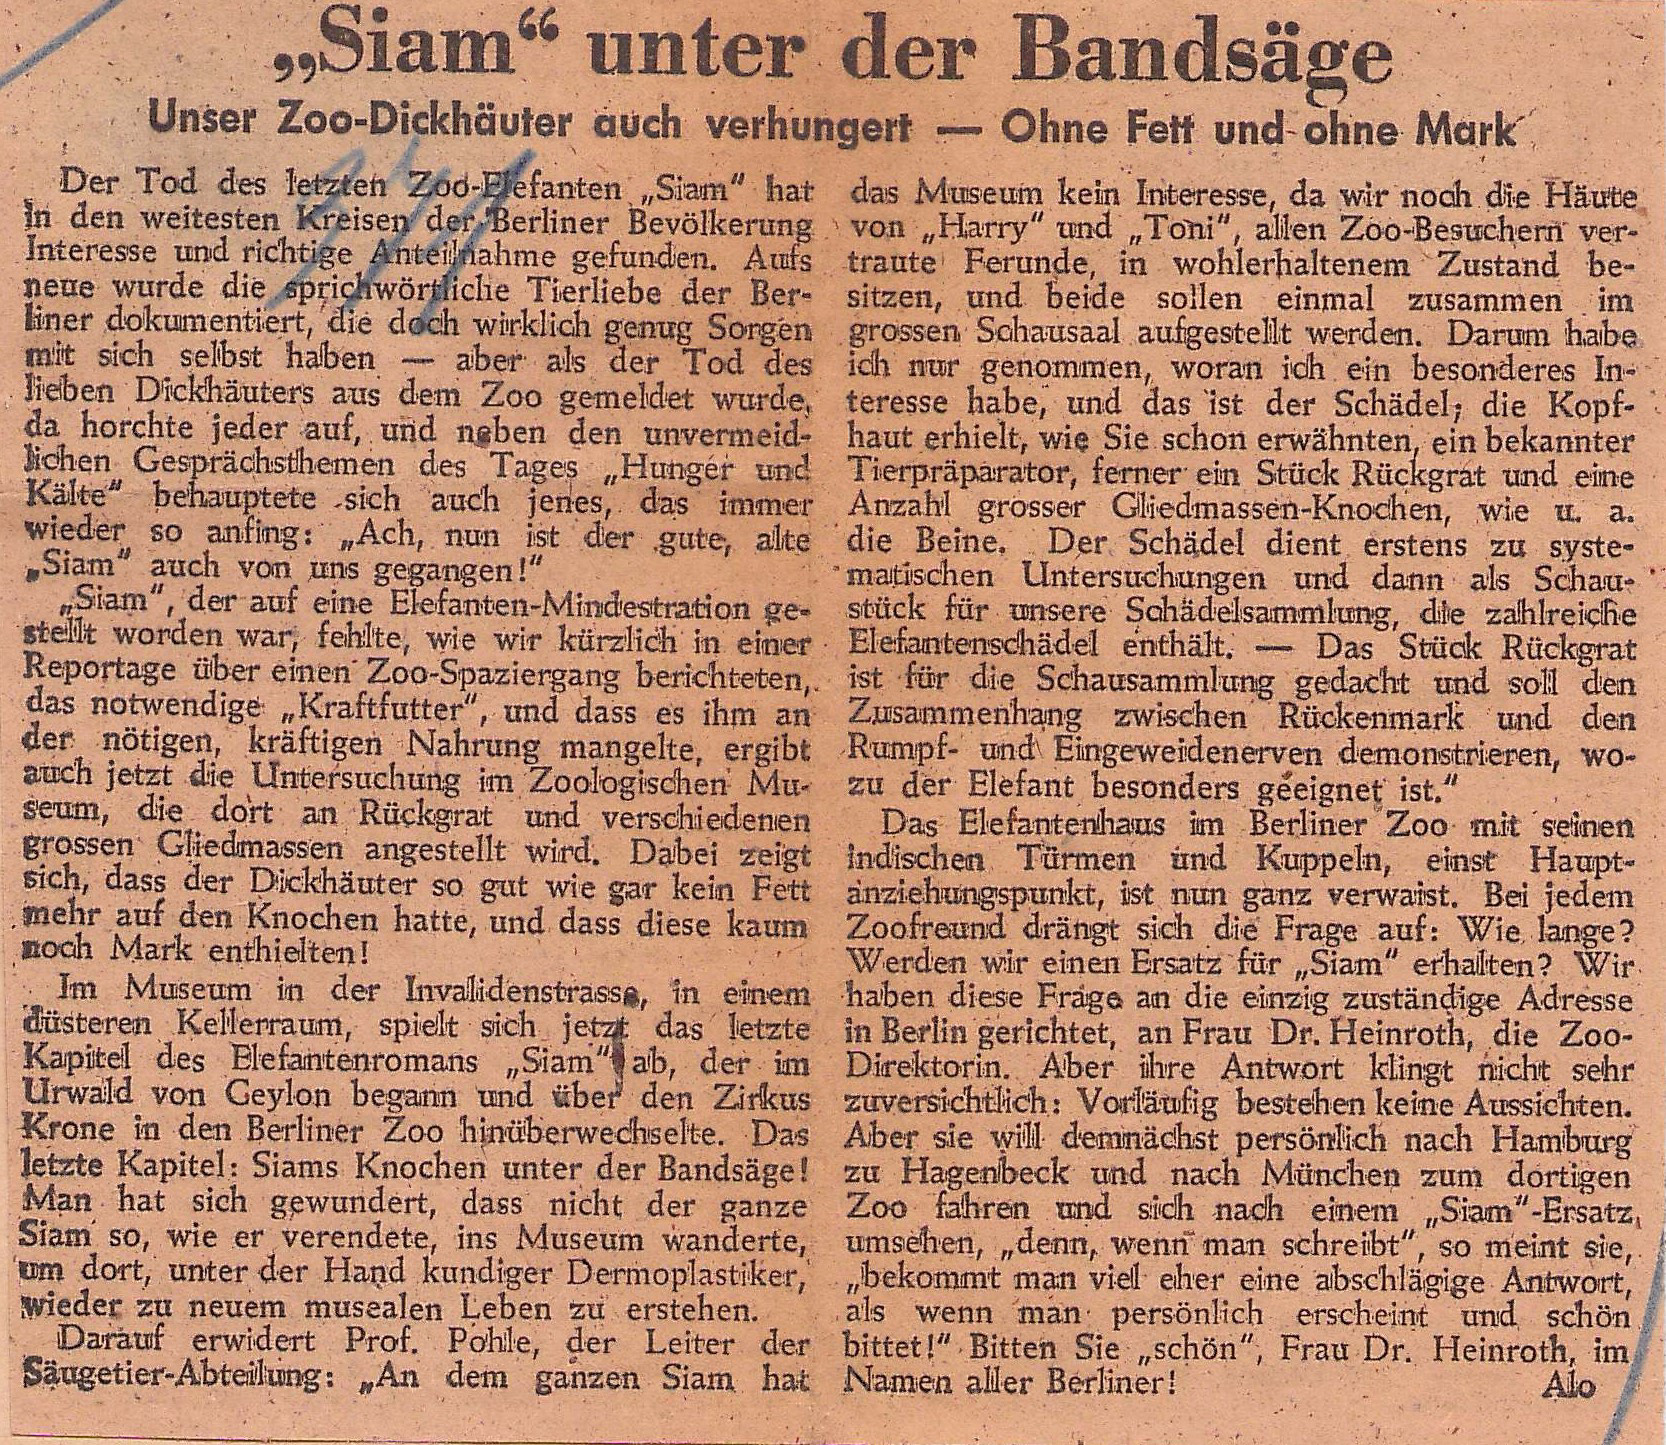 Newspaper clipping. Title: "Siam" under the band saw. No more than skin and bones: our zoo pachyderm also suffered from starvation.